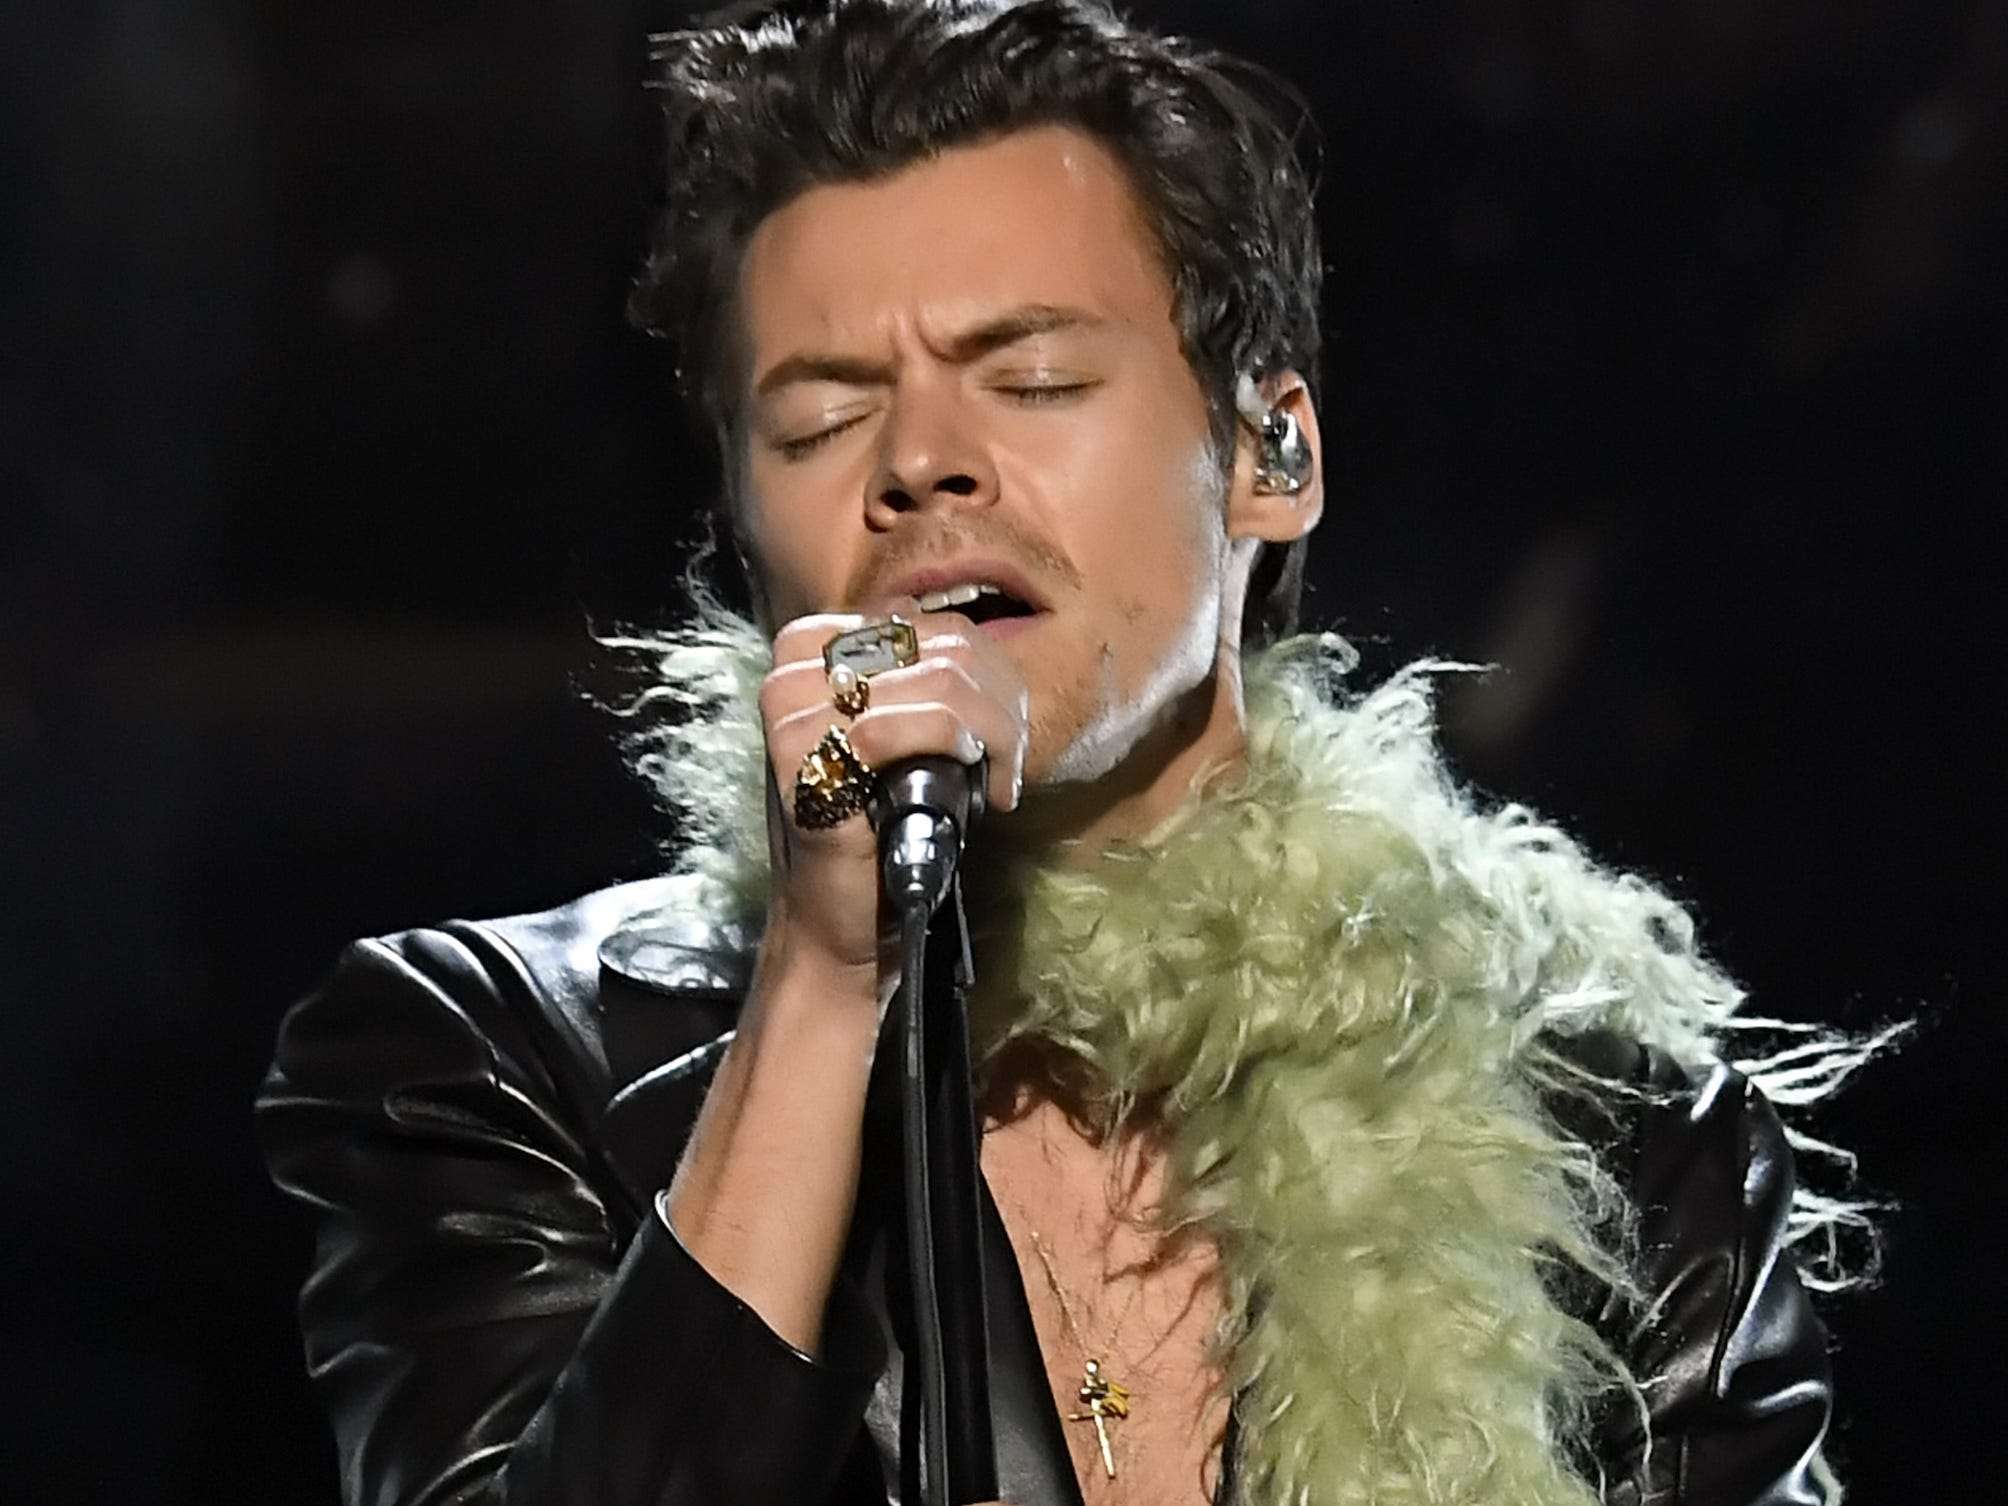 Watch Harry Styles open the Grammys with a performance of his hit song